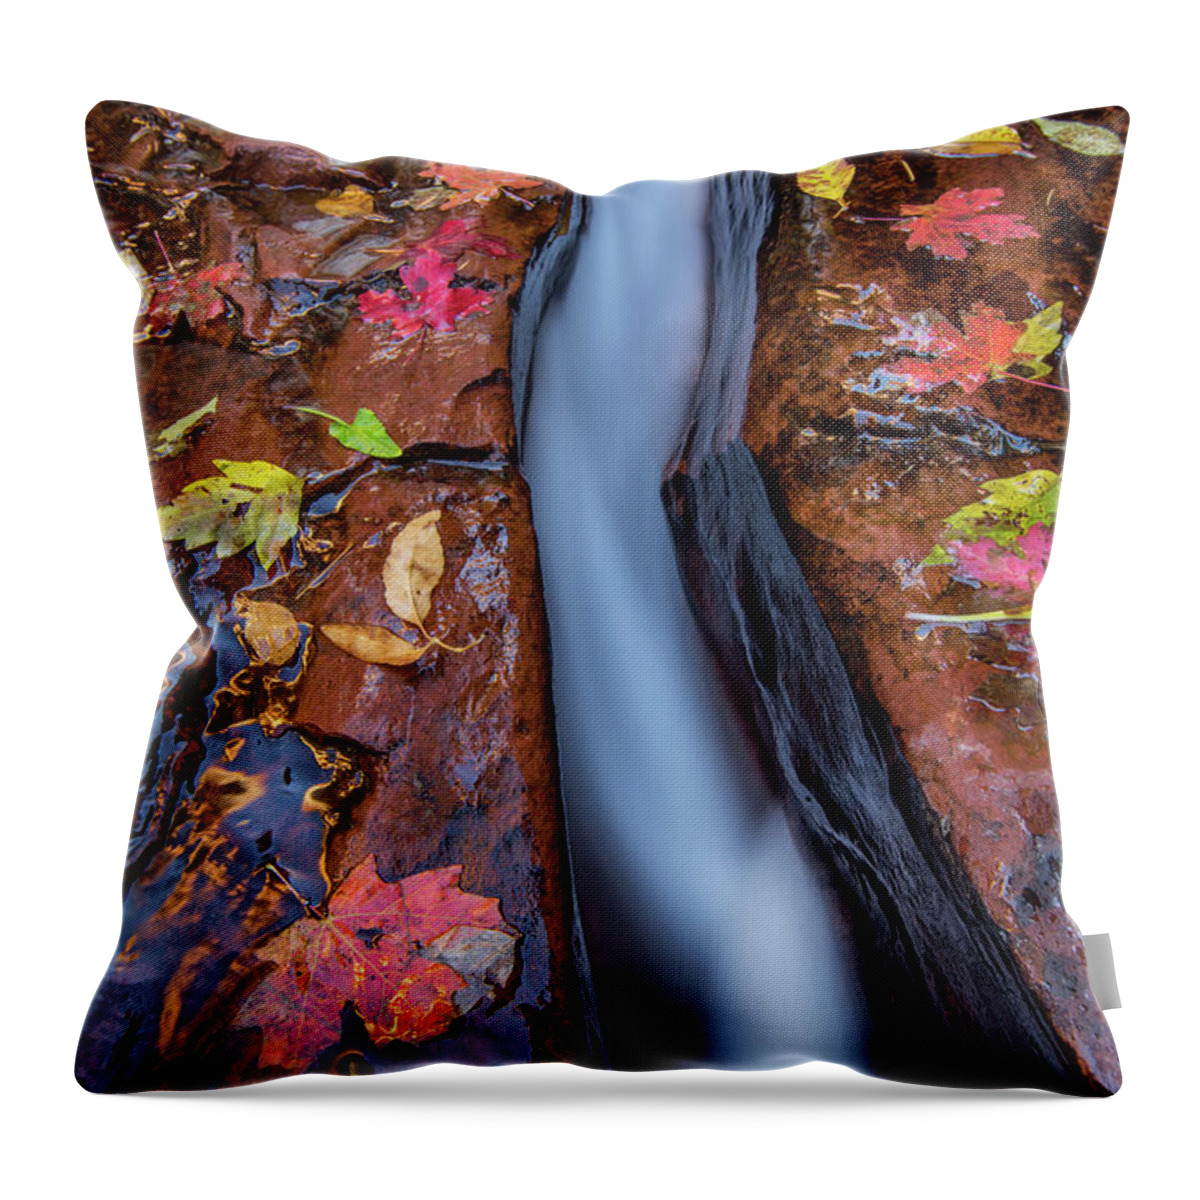 Zion Throw Pillow featuring the photograph The Crack by Wesley Aston